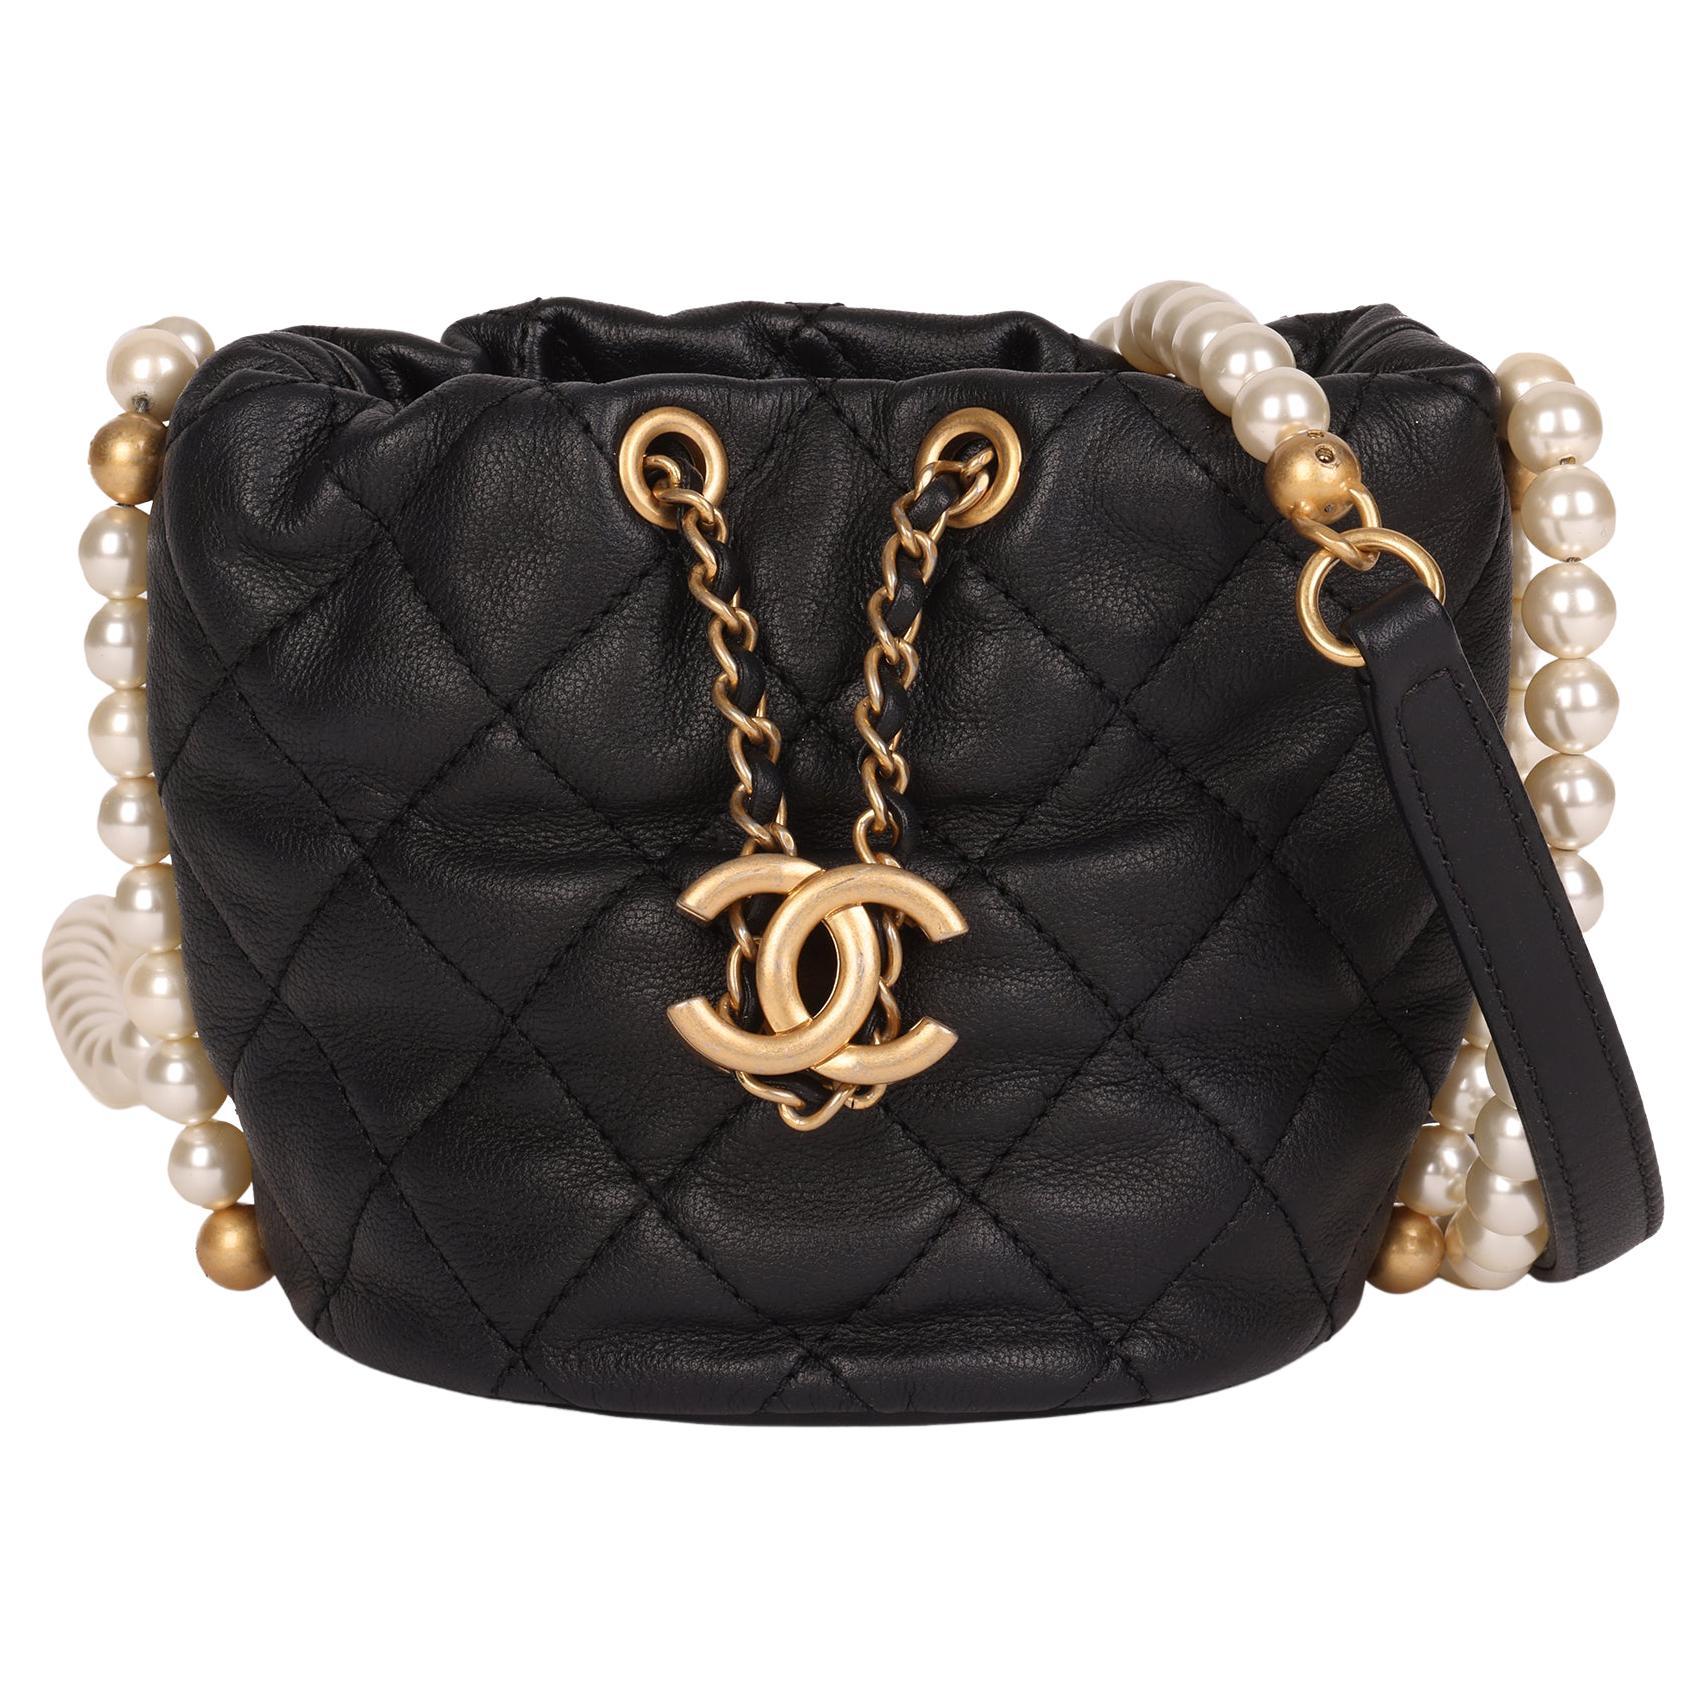 Black Patent Chanel Flap - 98 For Sale on 1stDibs